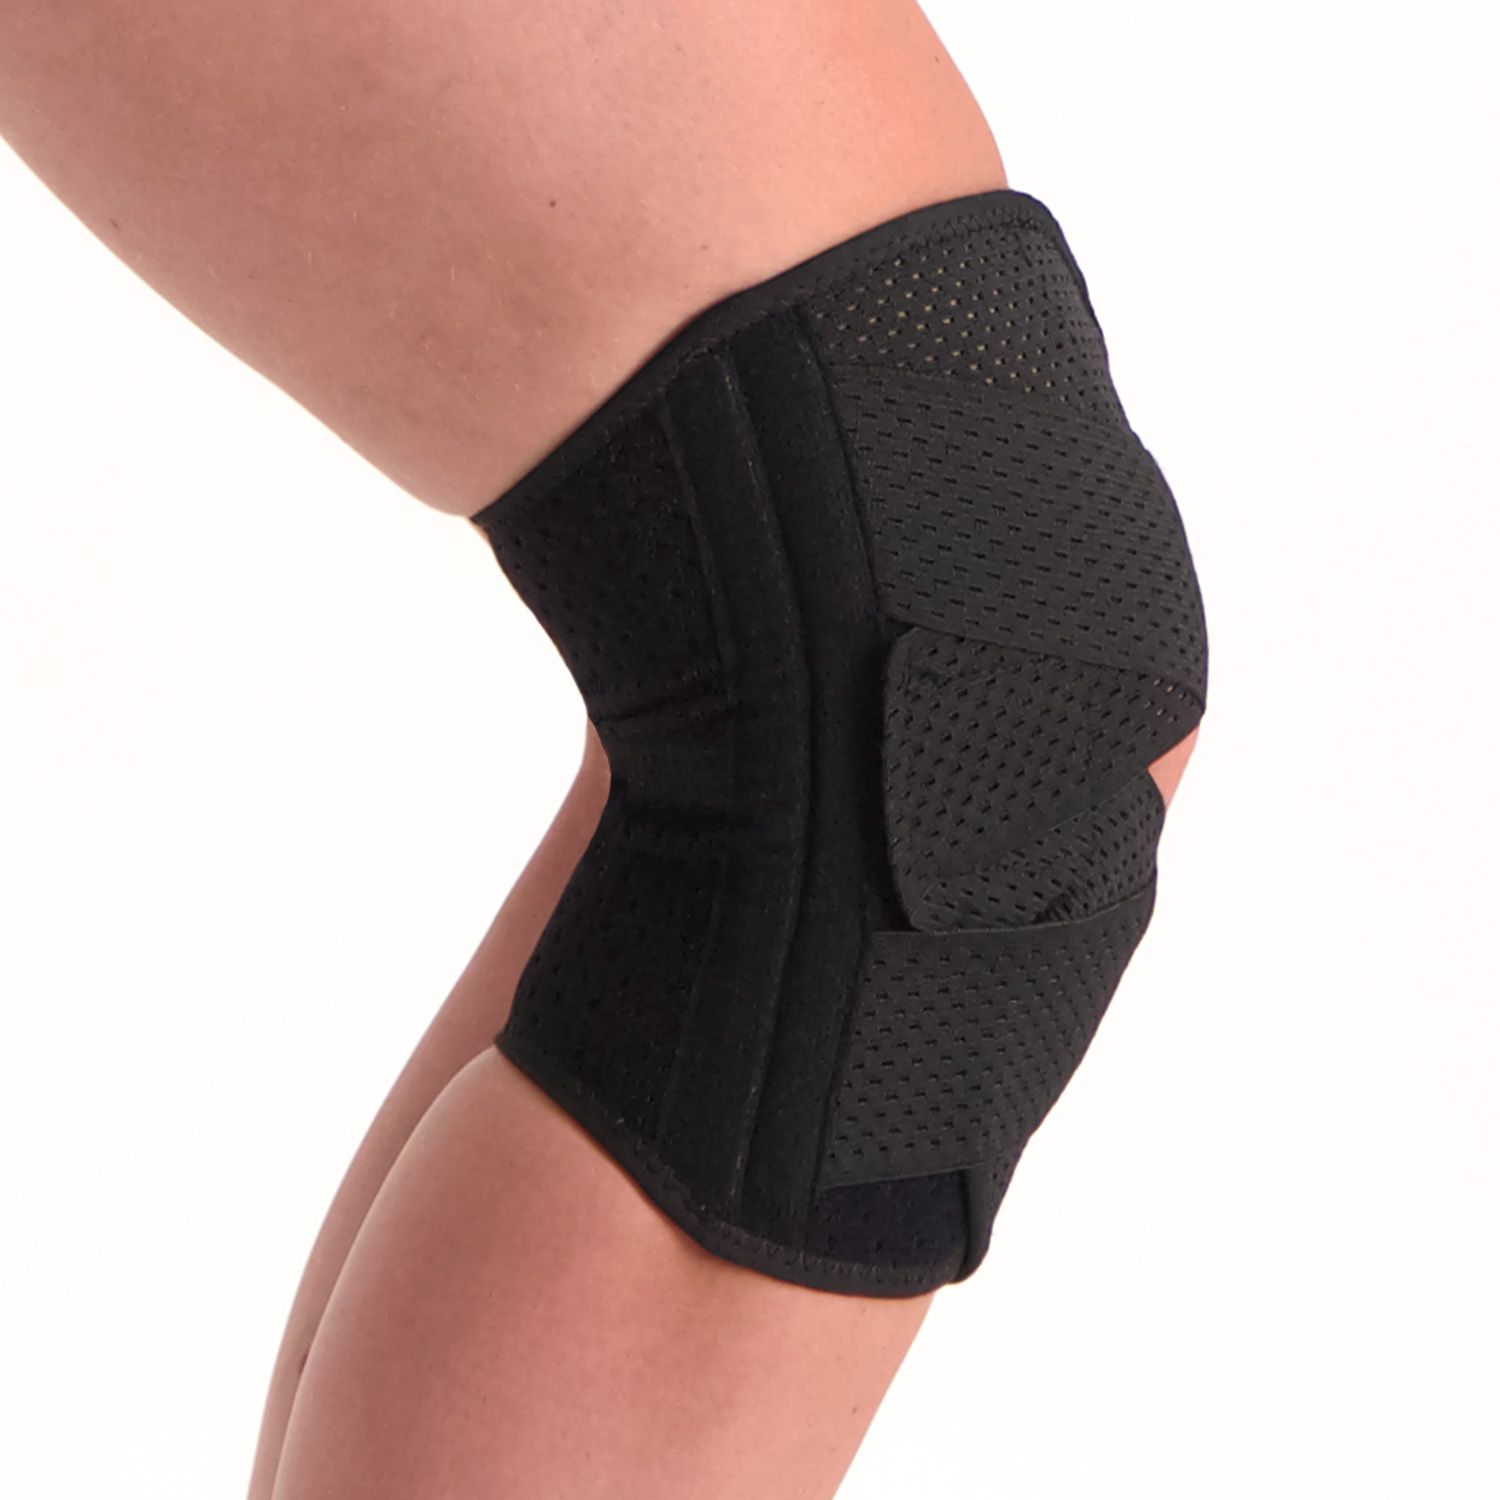 dunimed wrap knee support with busks side view